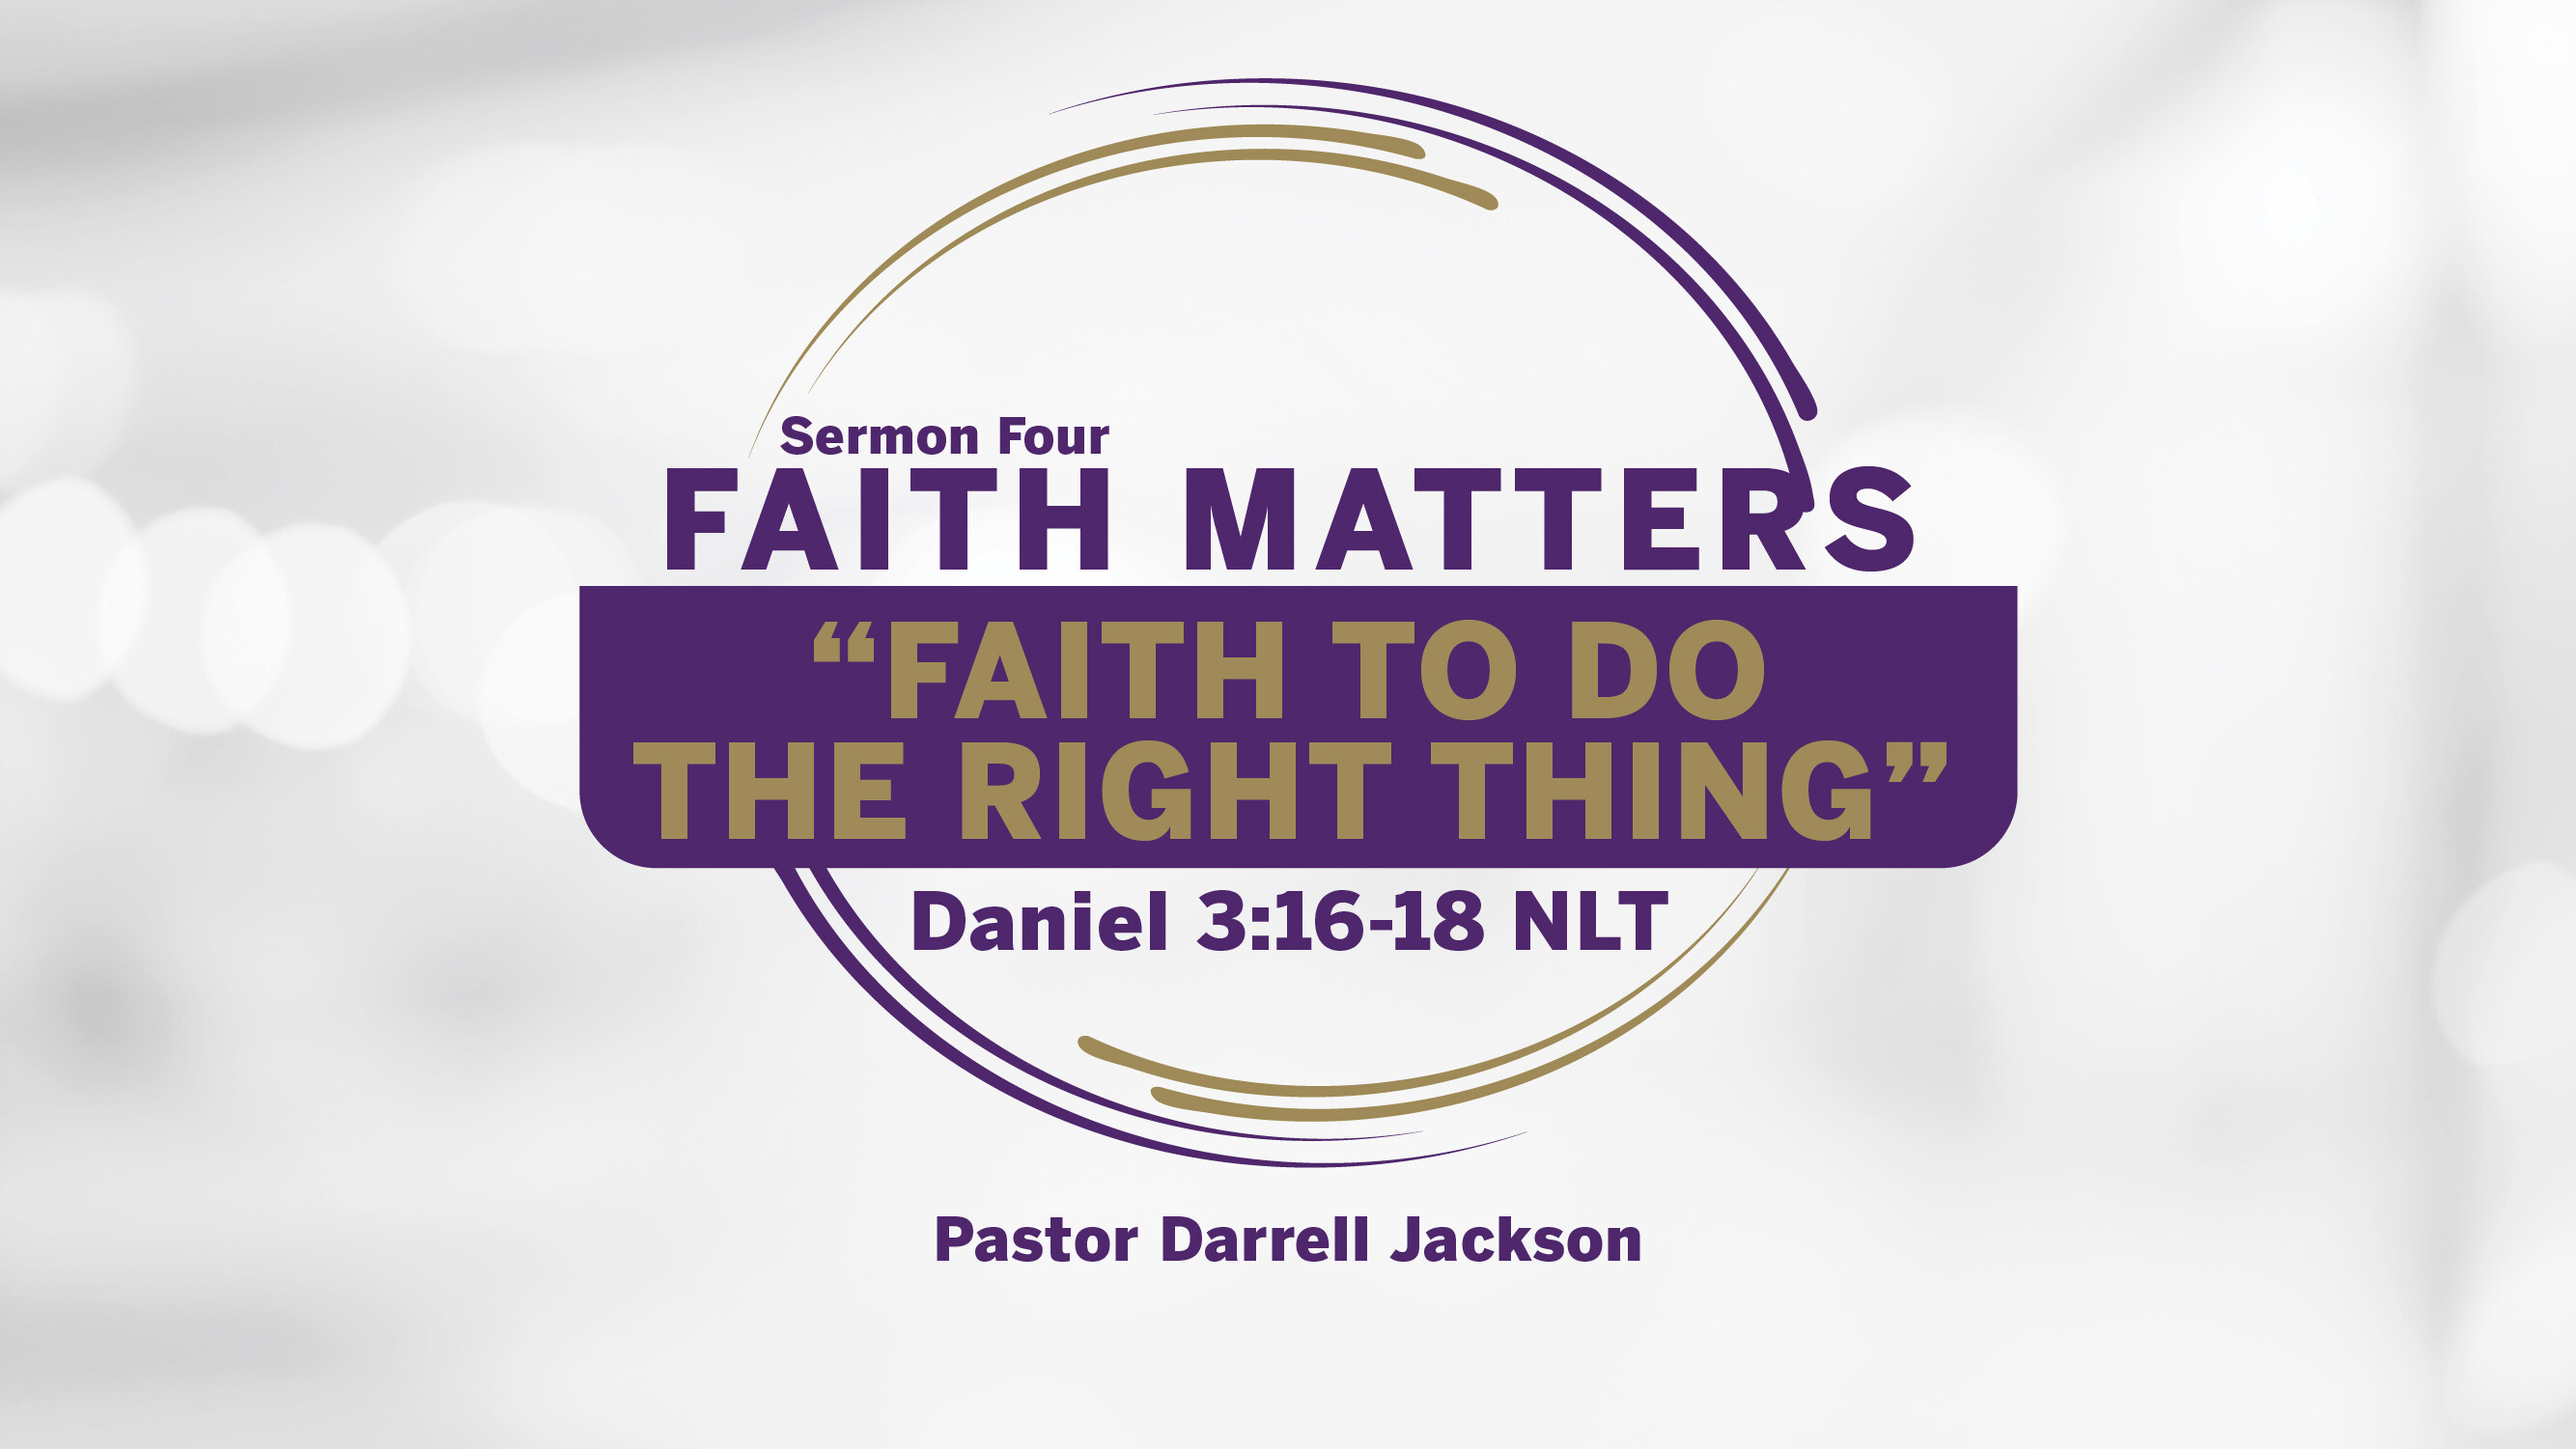 "Faith to Do the Right Thing."